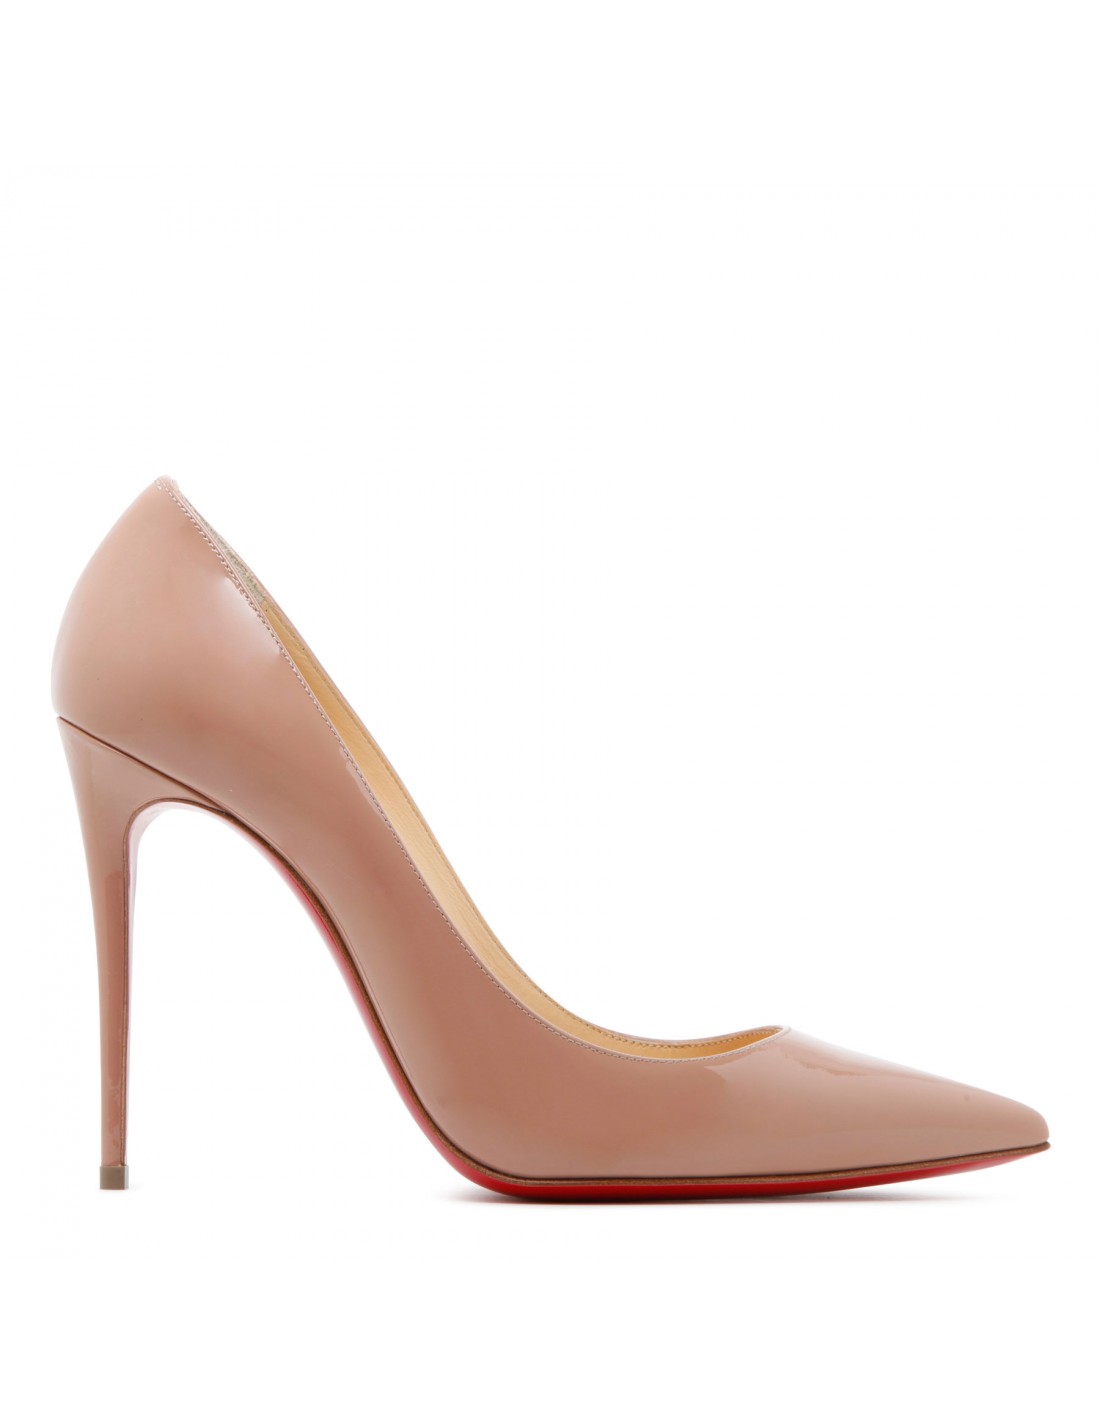 Kate 100 nude patent pumps